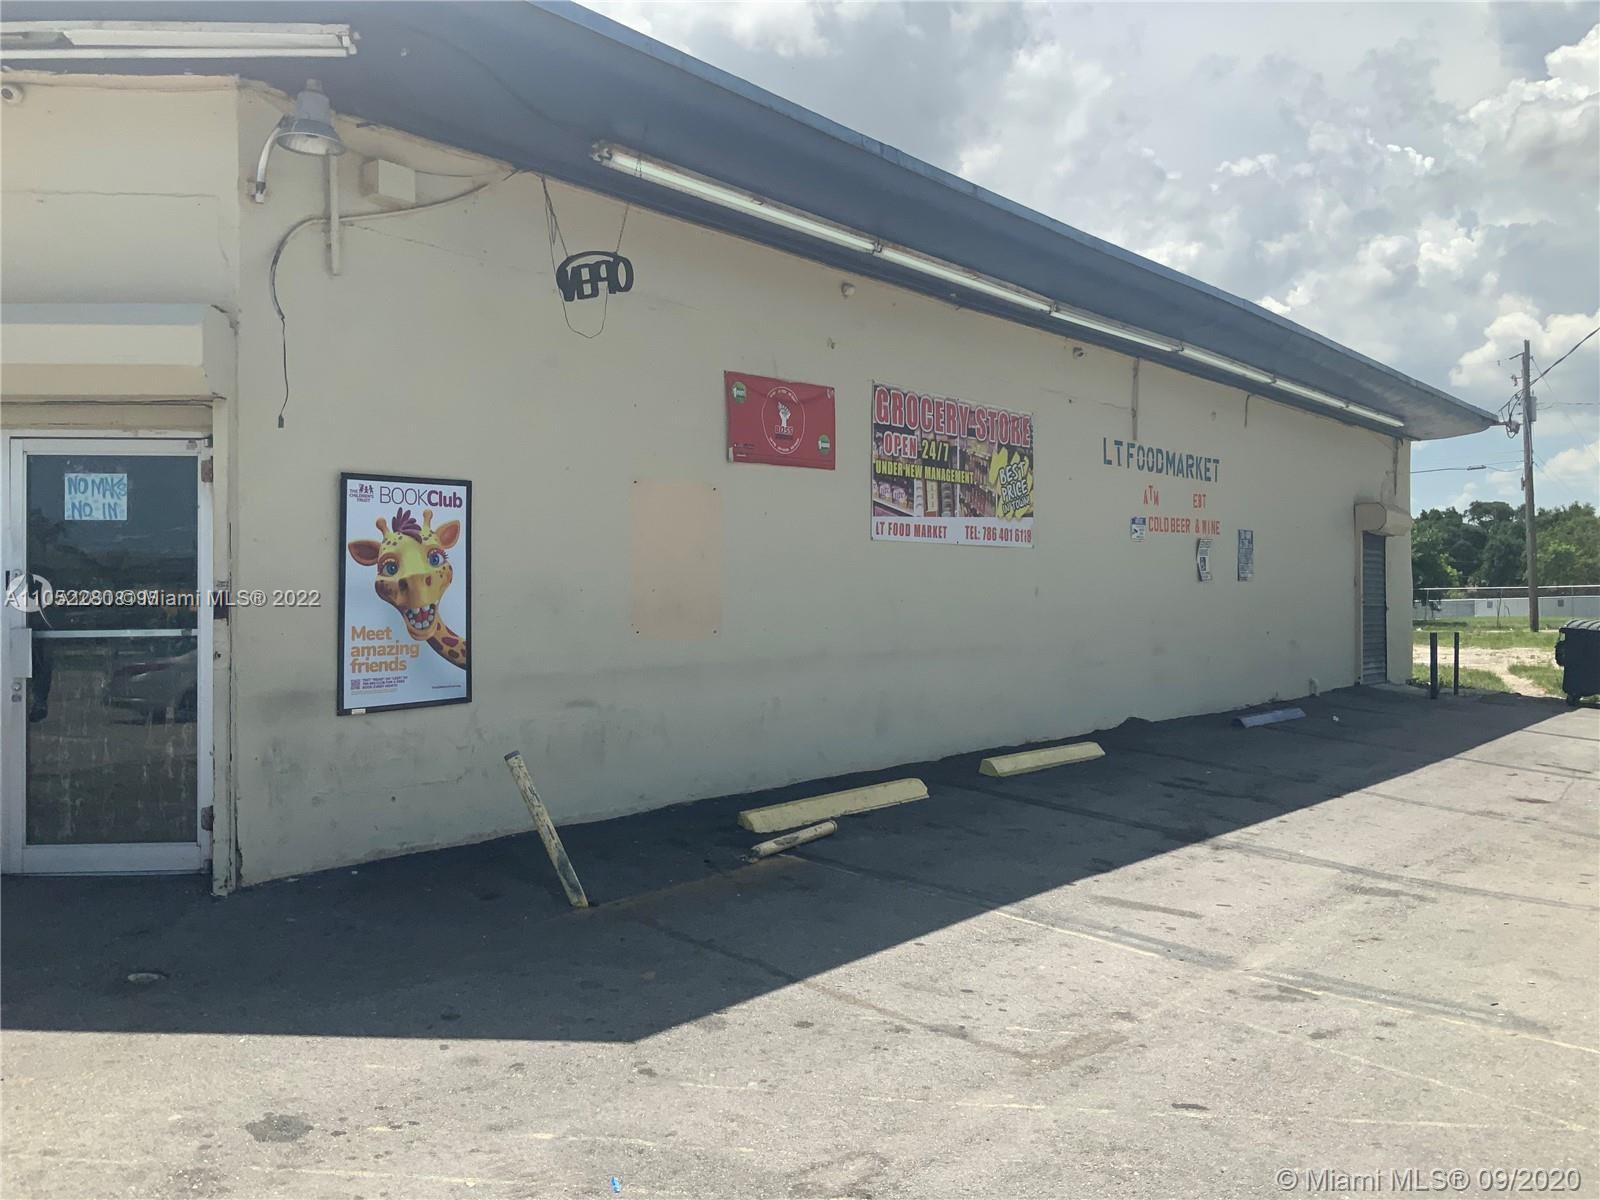 The property got a tenant. The lease expires on March 17, 2022.
 PROPERTY IS SOLD AS IS NOT SUBJECT TO APPRECIAL VALUE OR INSPECTIONS. ENVIRONMENTAL INSPECTION OR TESTS ARE WELCOME. 
Any questions call the listing agent.